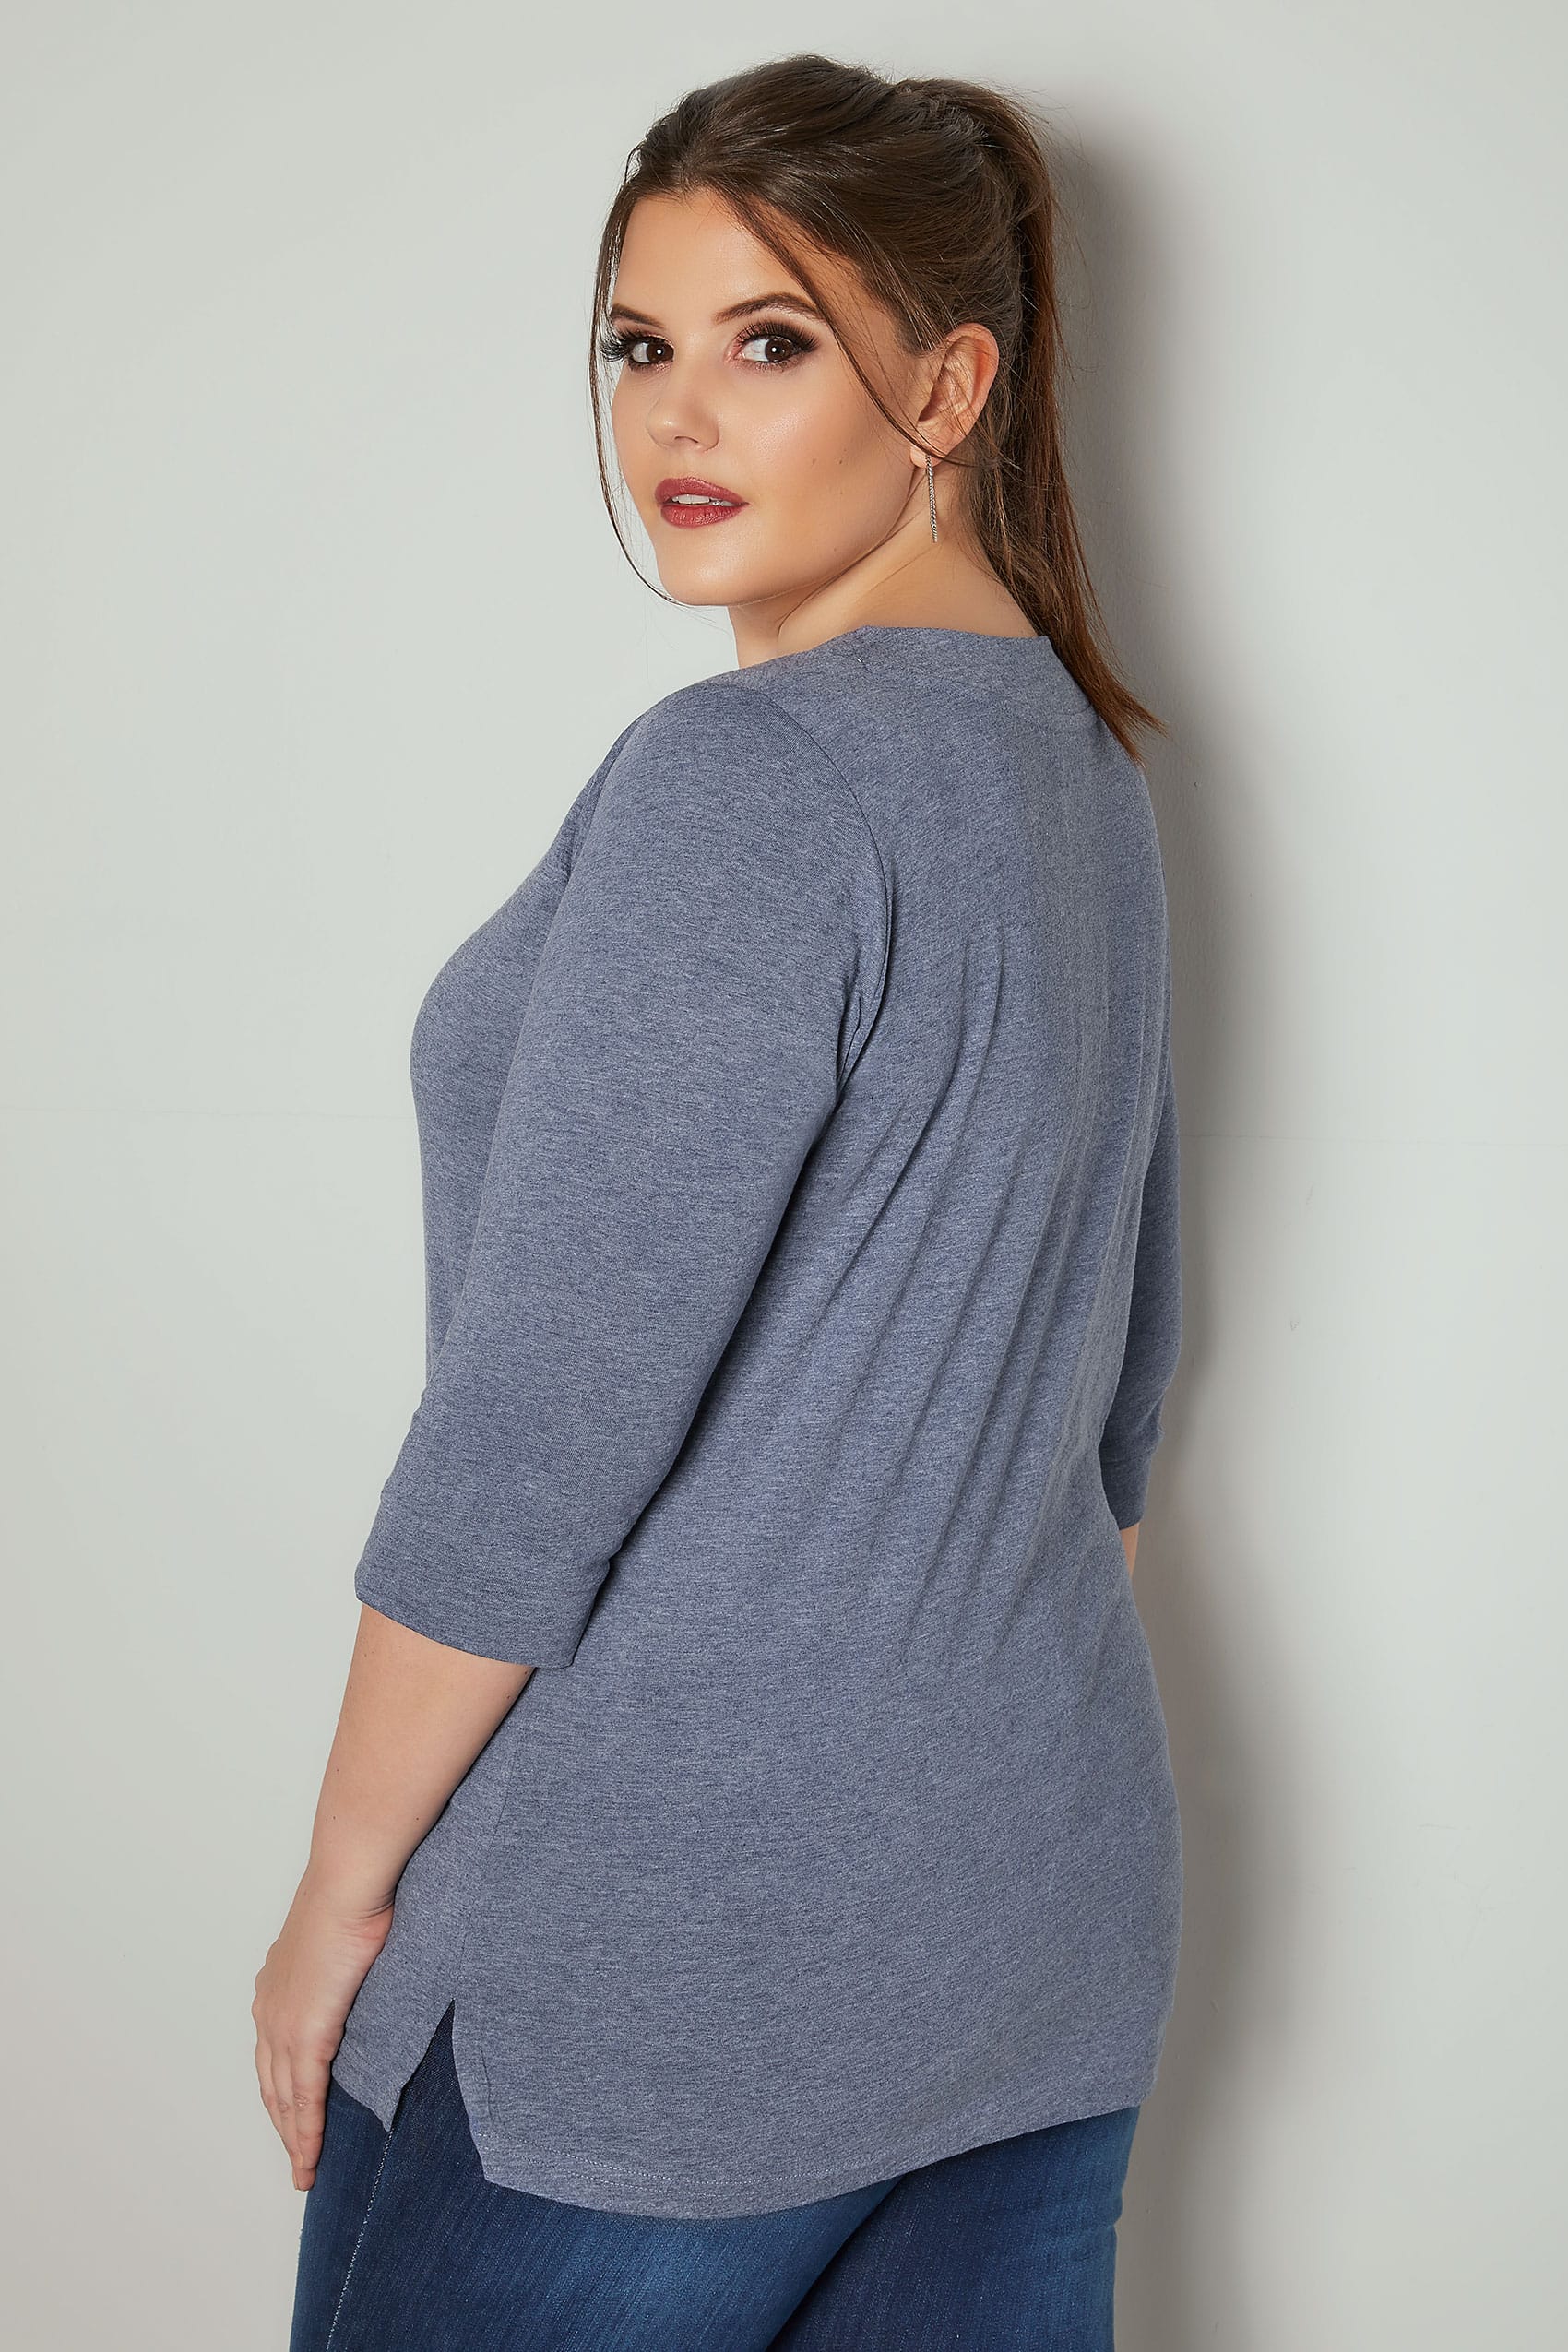 Blue Marl Band Scoop Neckline T-Shirt With 3/4 Sleeves, Plus size 16 to 36